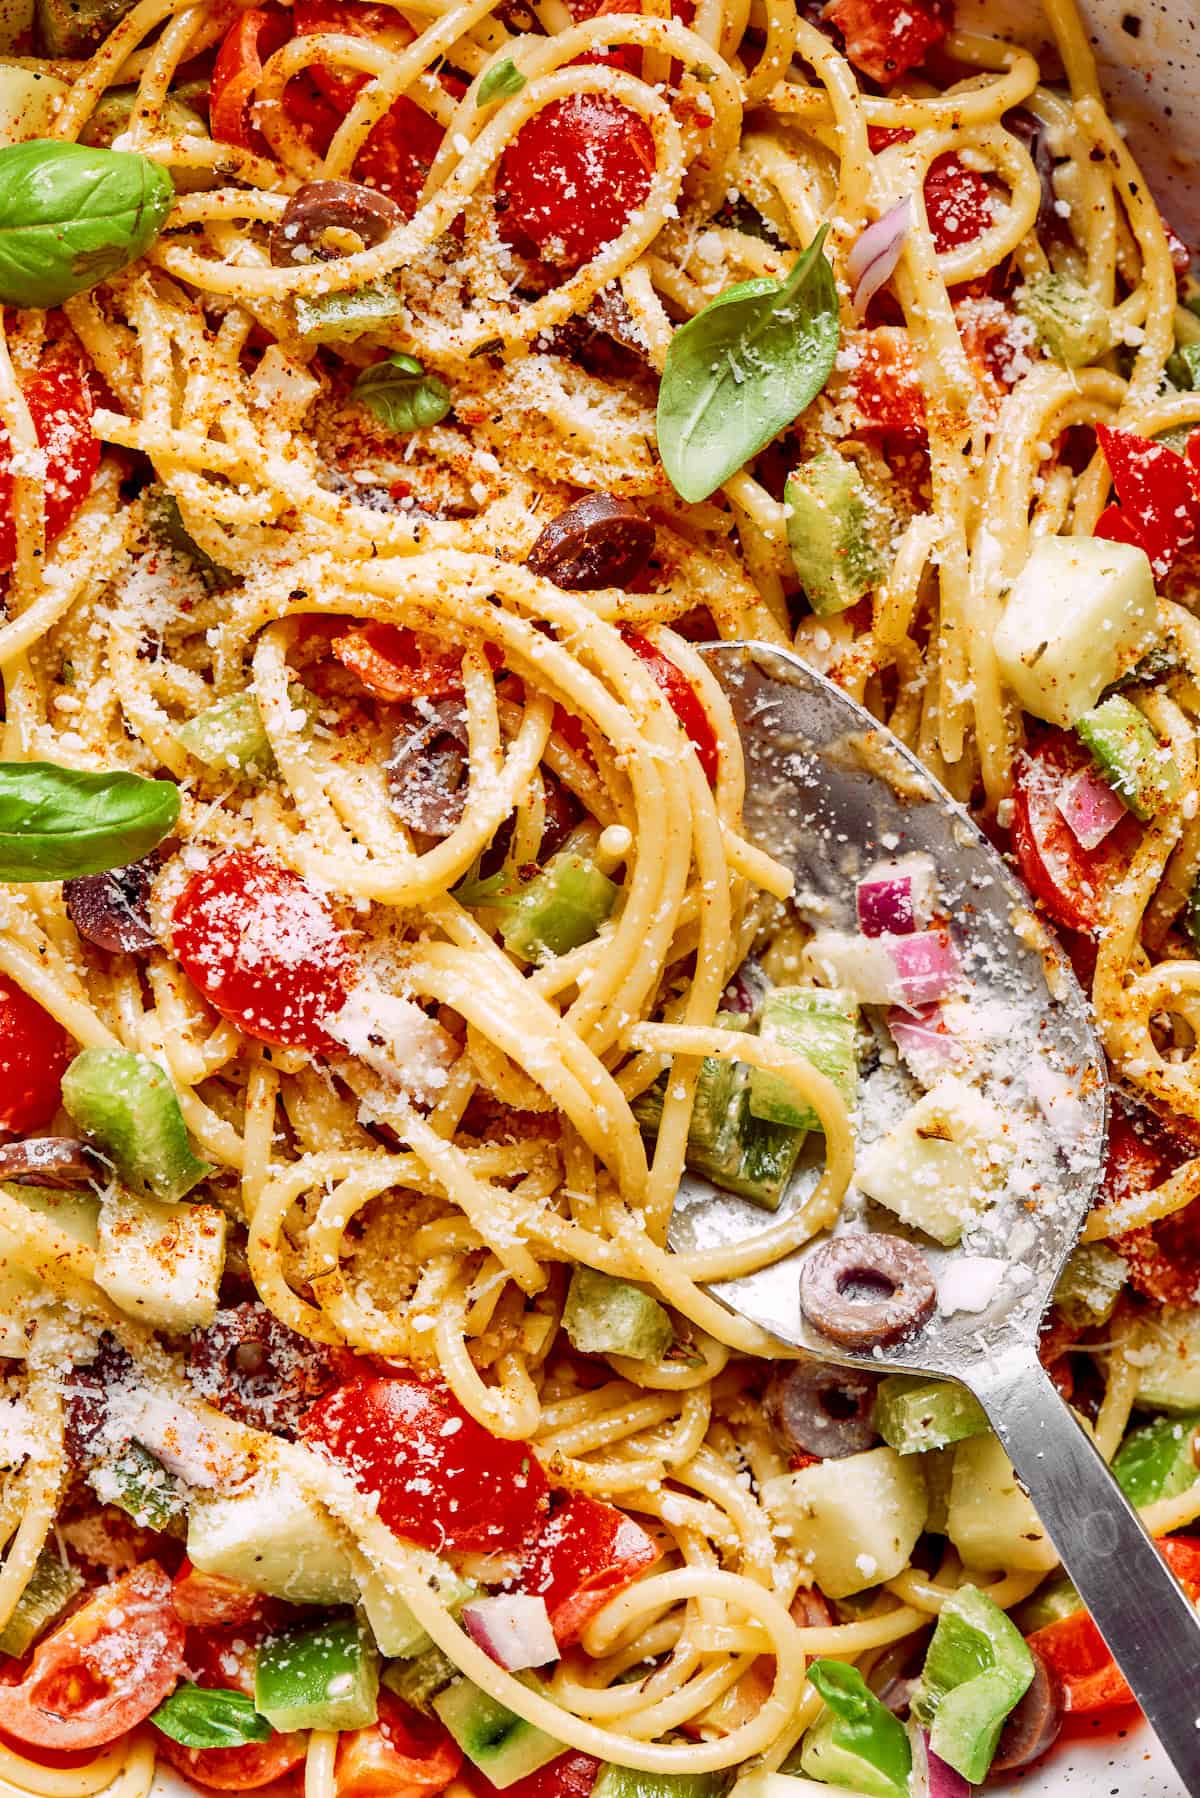 A close up of spaghetti salad shows cheese, noodles, vegetables, and olives.